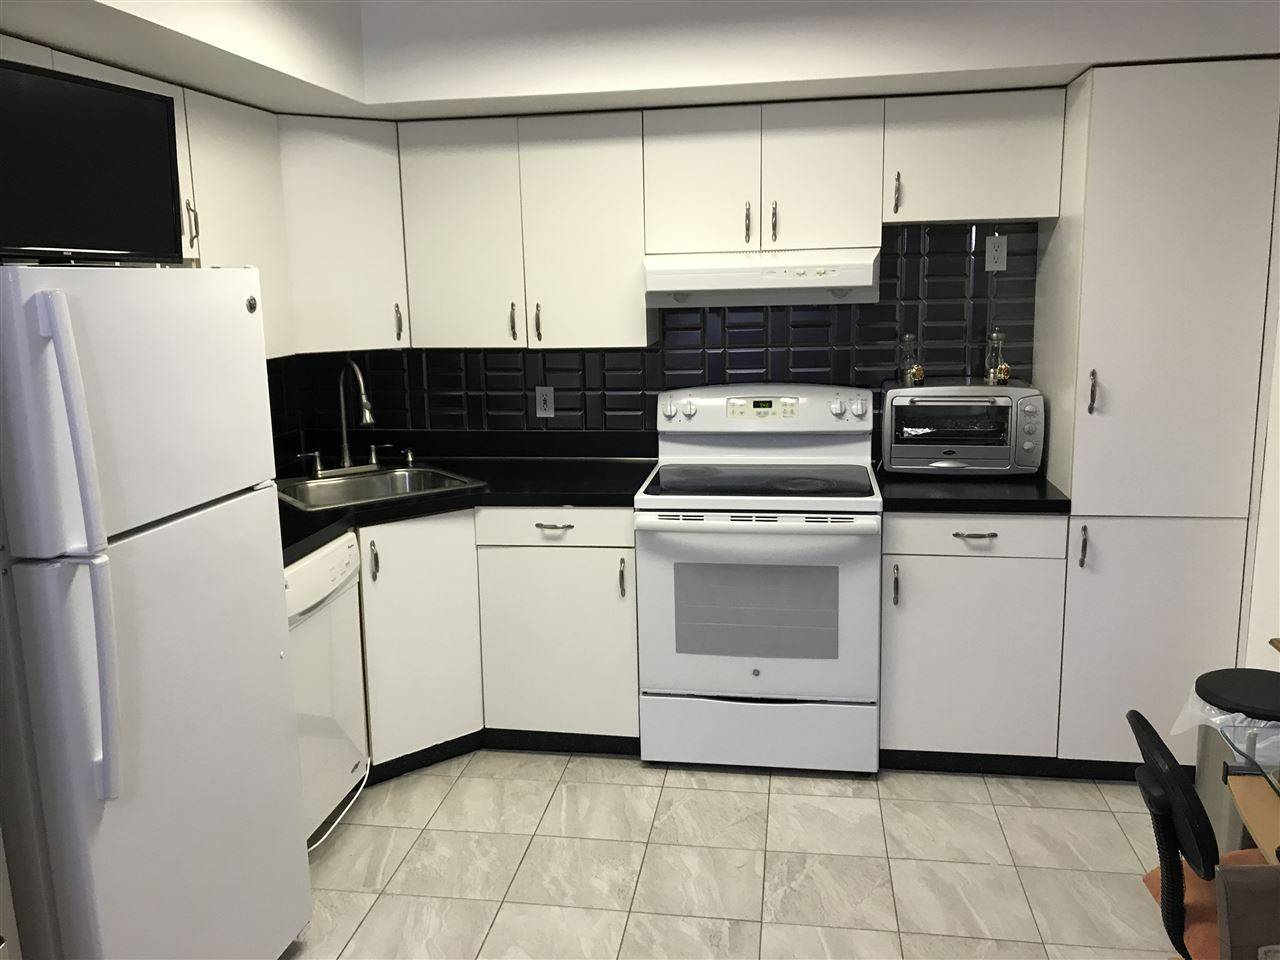 LESS THAN A BLOCK AWAY FROM BERGENLINE AVE THIS 2 BEDROOM 1